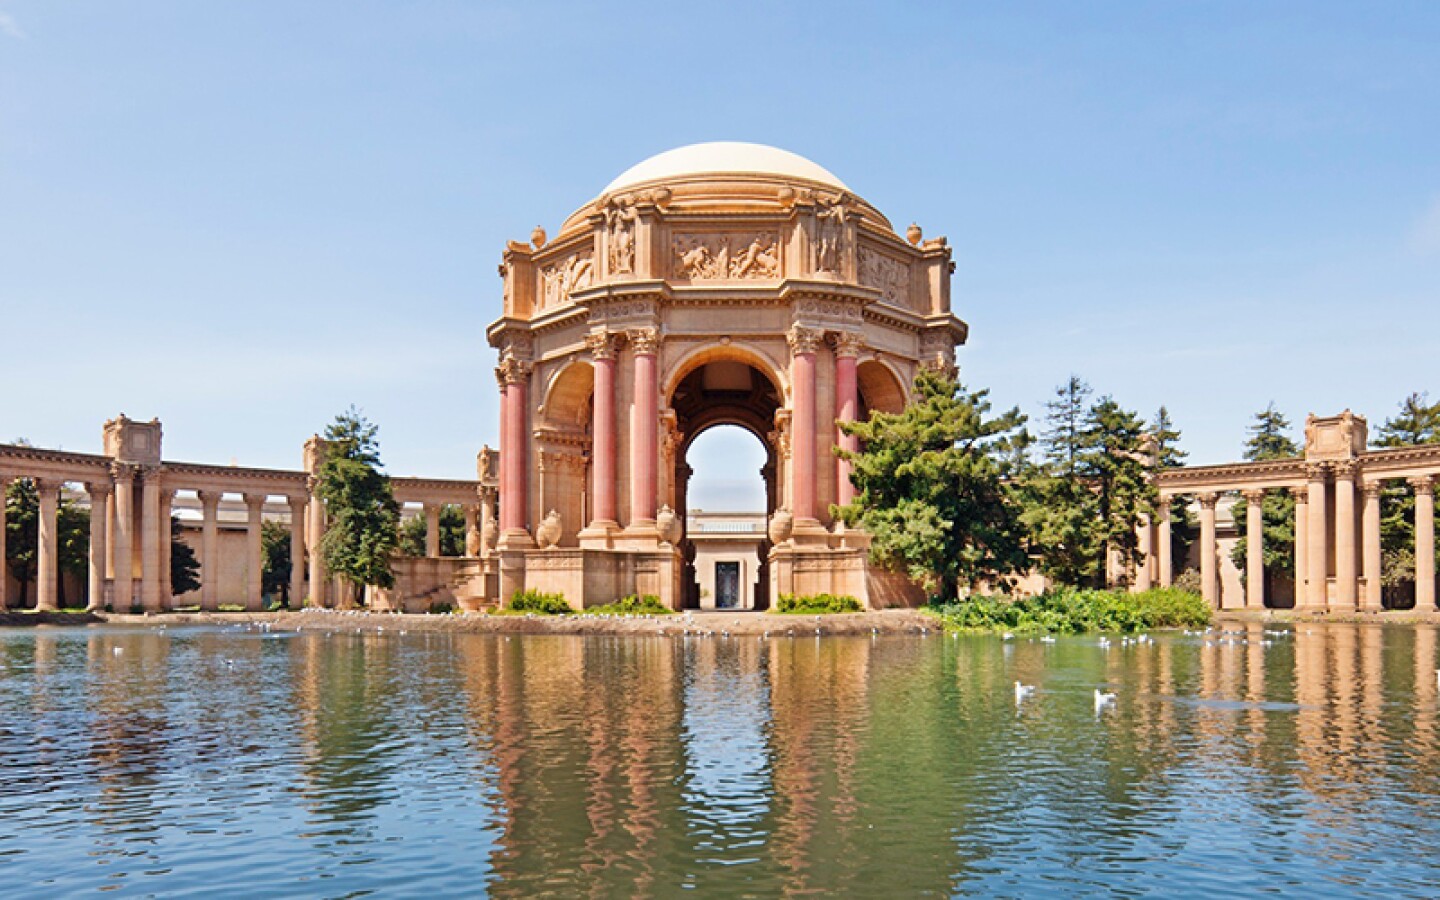 <a>The unique architecture for the Palace of Fine Arts makes it a recognizable landmark.</a>